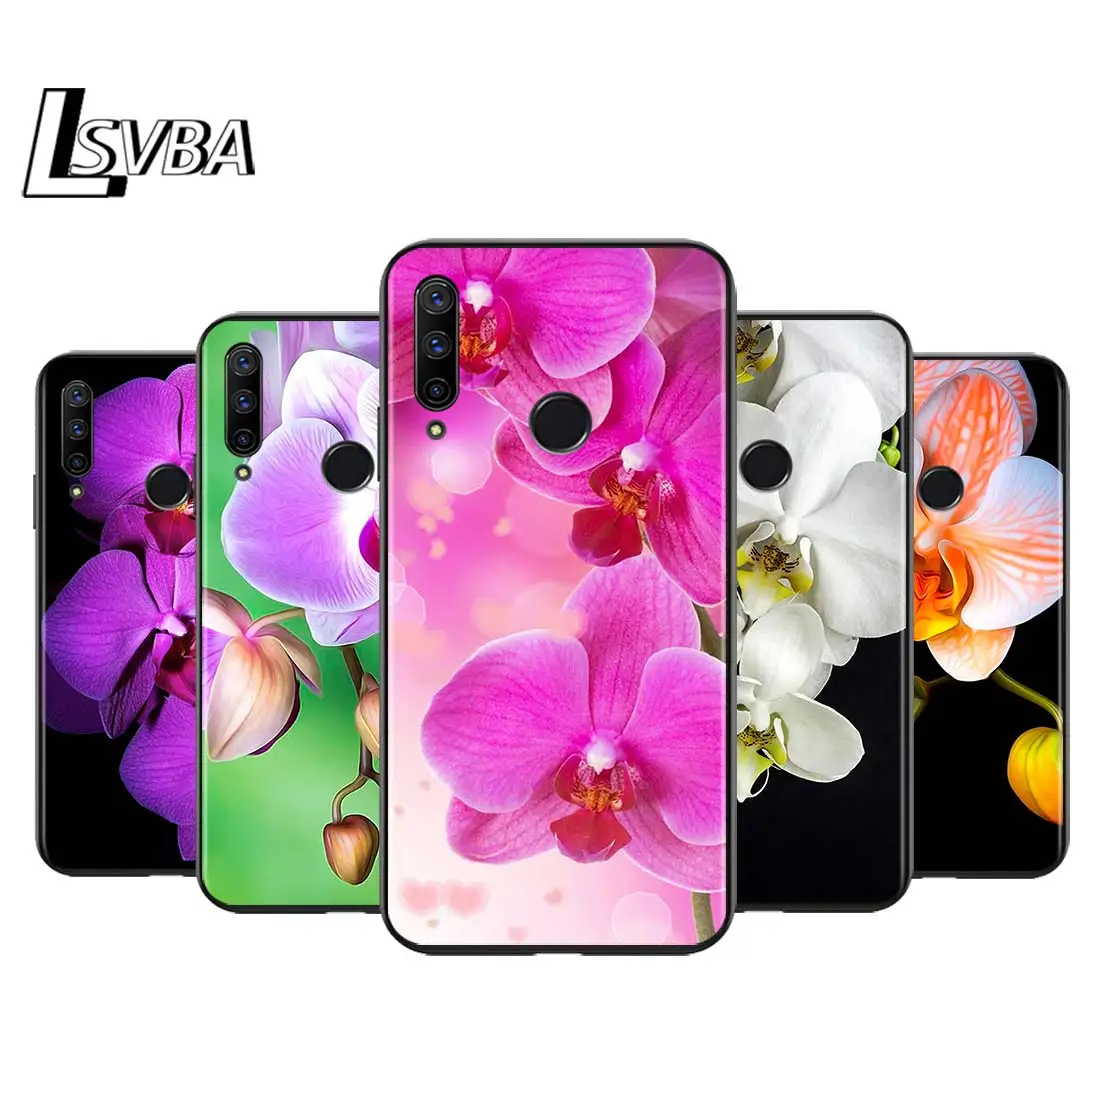 

Orchid Flowers for Huawei Honor 30 20S 20 10i 9S 9A 9C 9X 8X 10 9 Lite 8A 7C 7A Pro Phone Case Black Cover